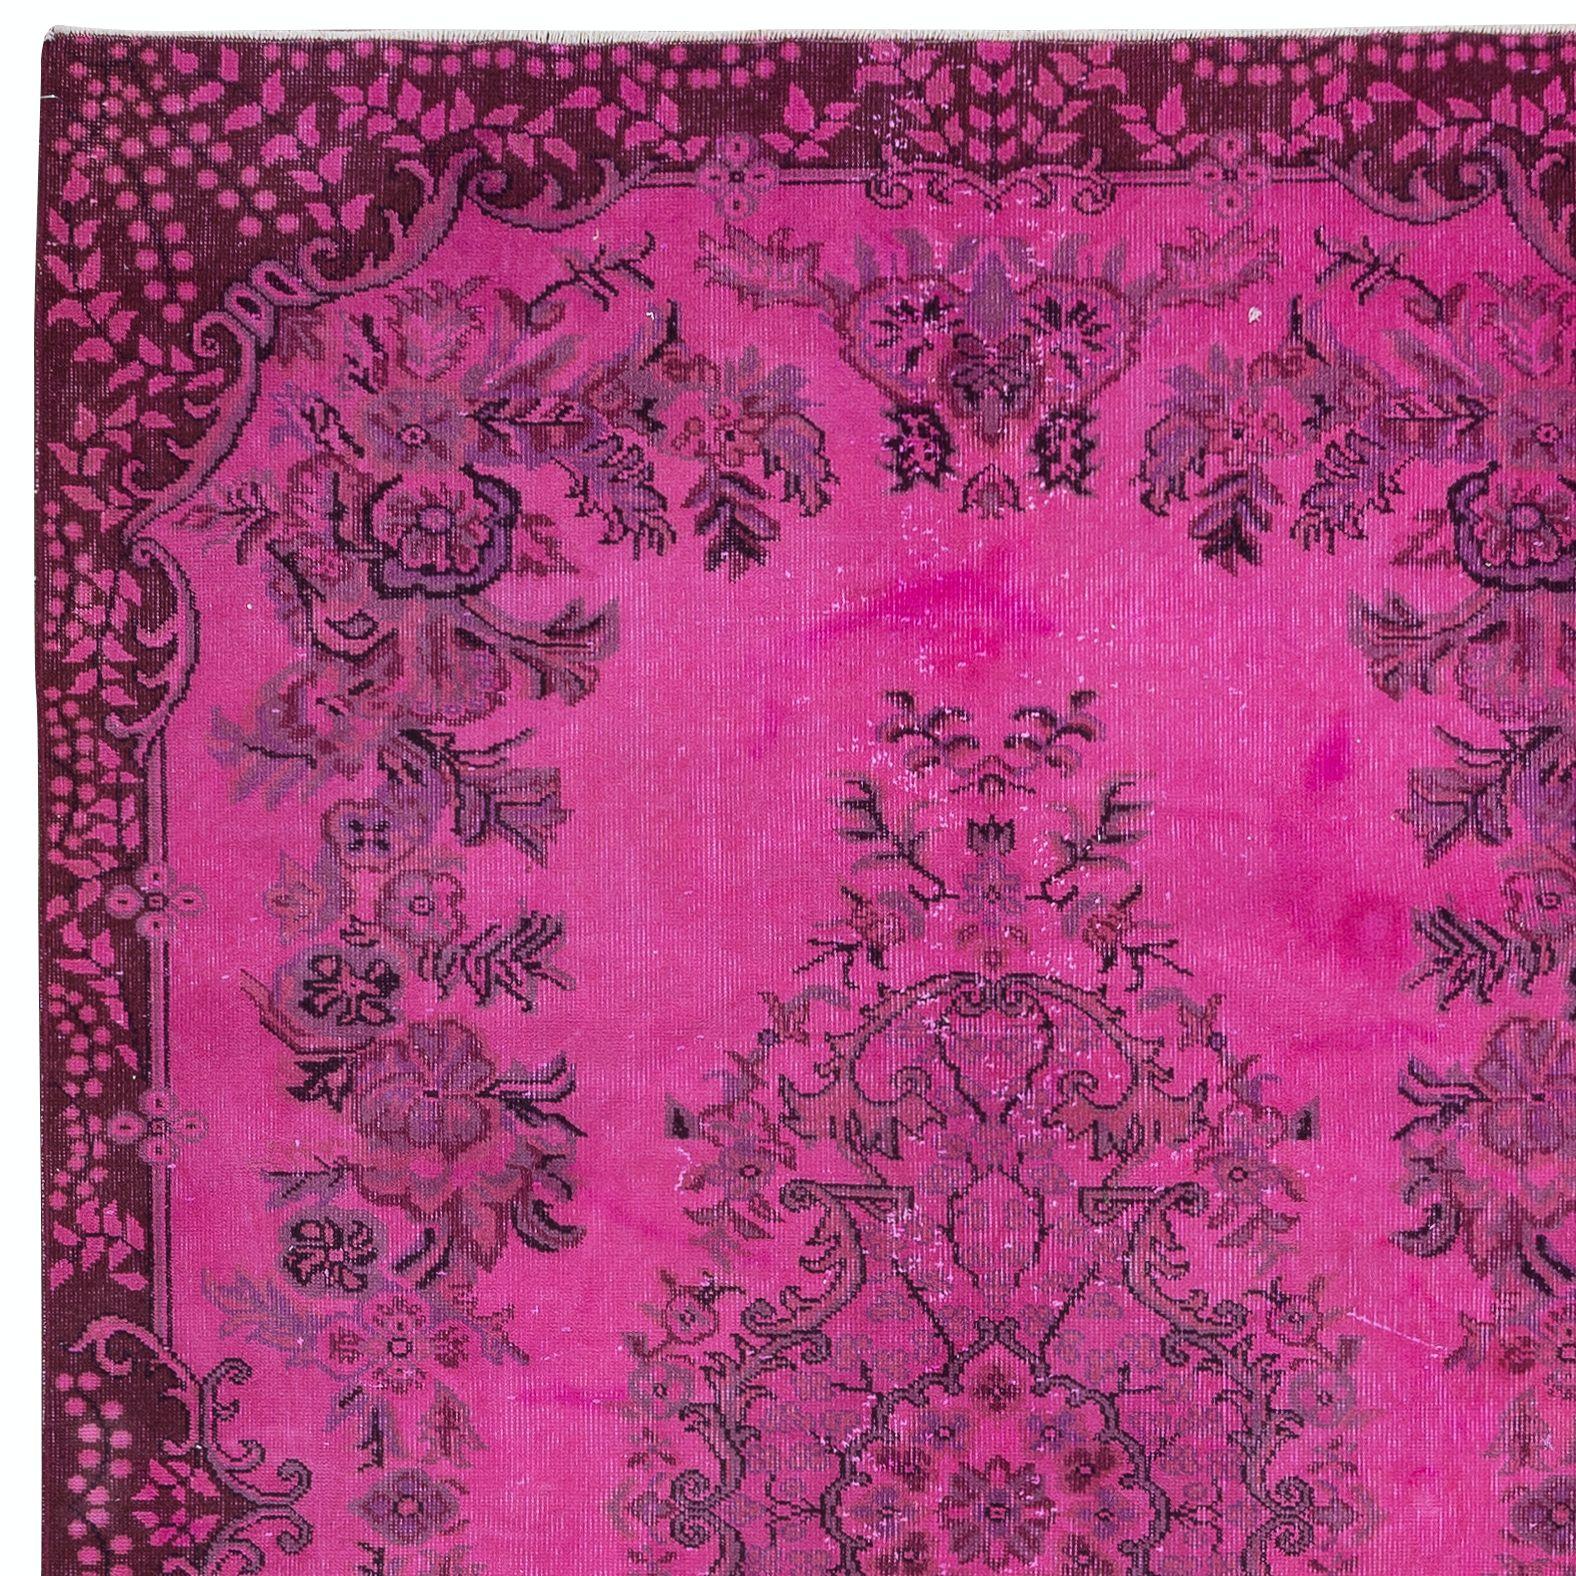 Hand-Knotted 6.4x9.6 Ft Contemporary Pink Area Rug, Handmade Turkish Carpet, Floor Covering For Sale